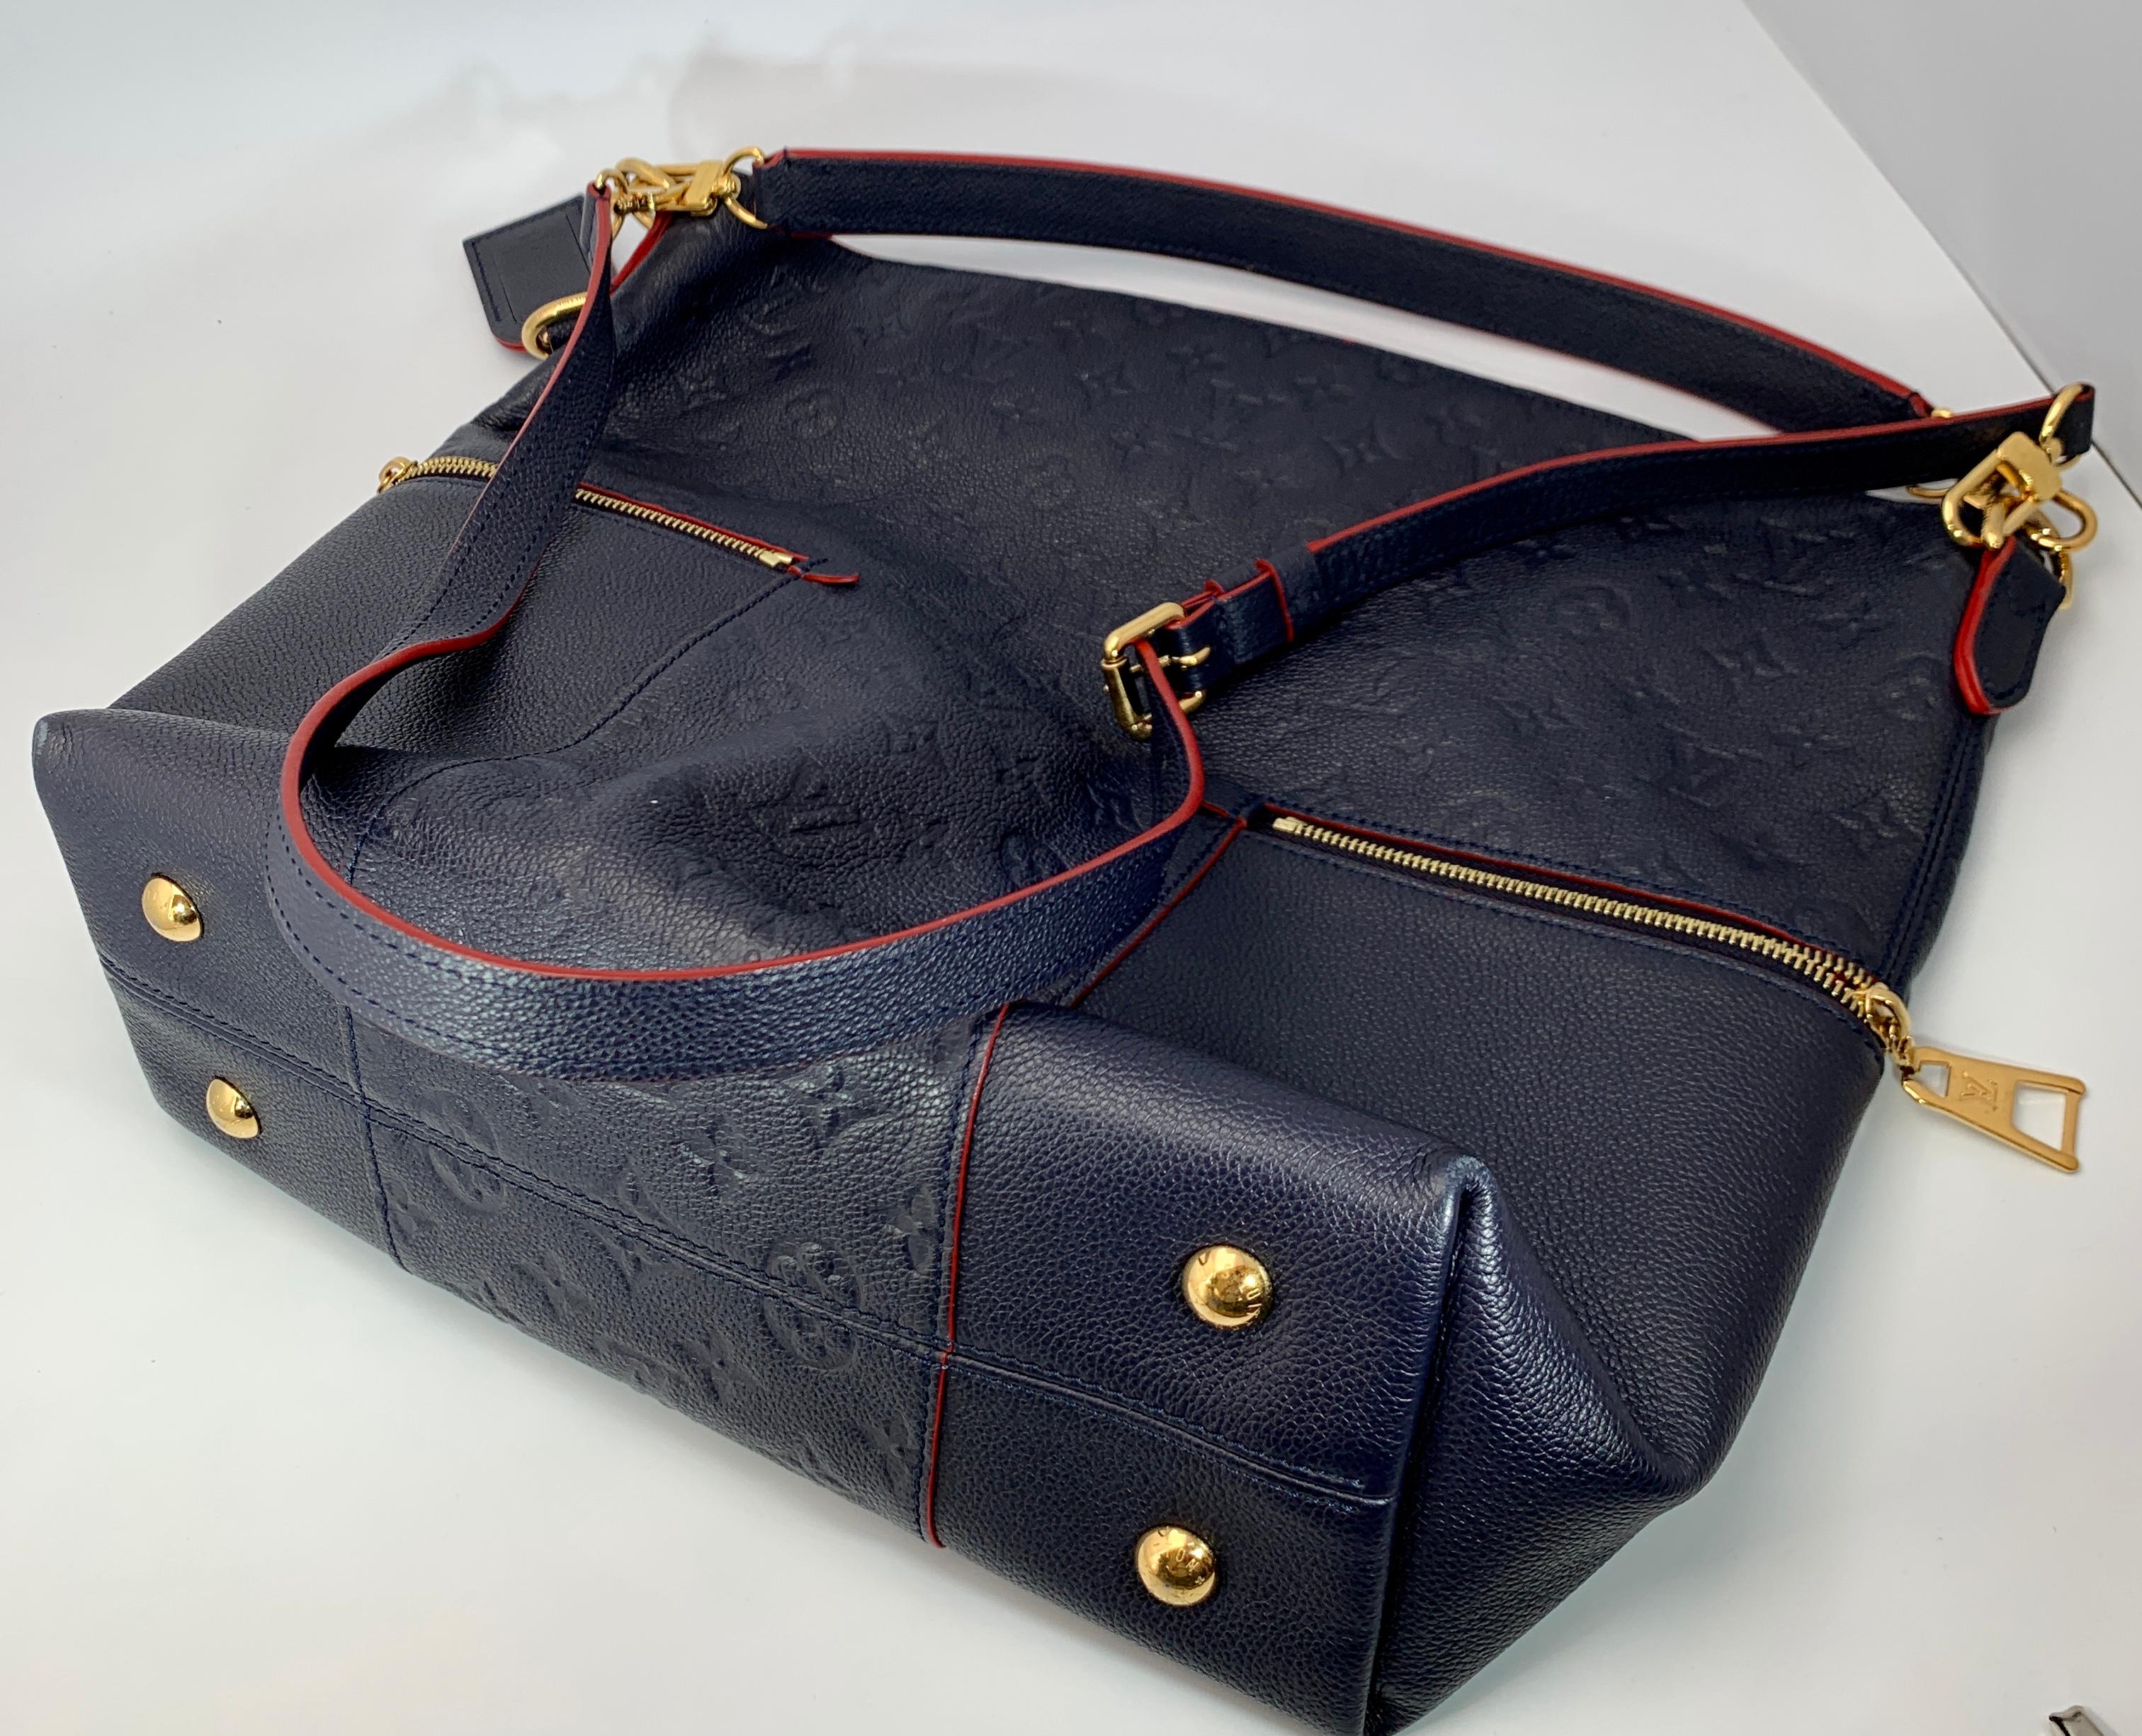 
Louis Vuitton Melie Navy Leather Empreinte Hobo Bag ,Monogram Leather
Very eye catching LV Mélie  Monogram Empreinte Leather. 
Navy blue color with red lining and interior
The shoulder bag features horizontal zipper pockets that wrap around the